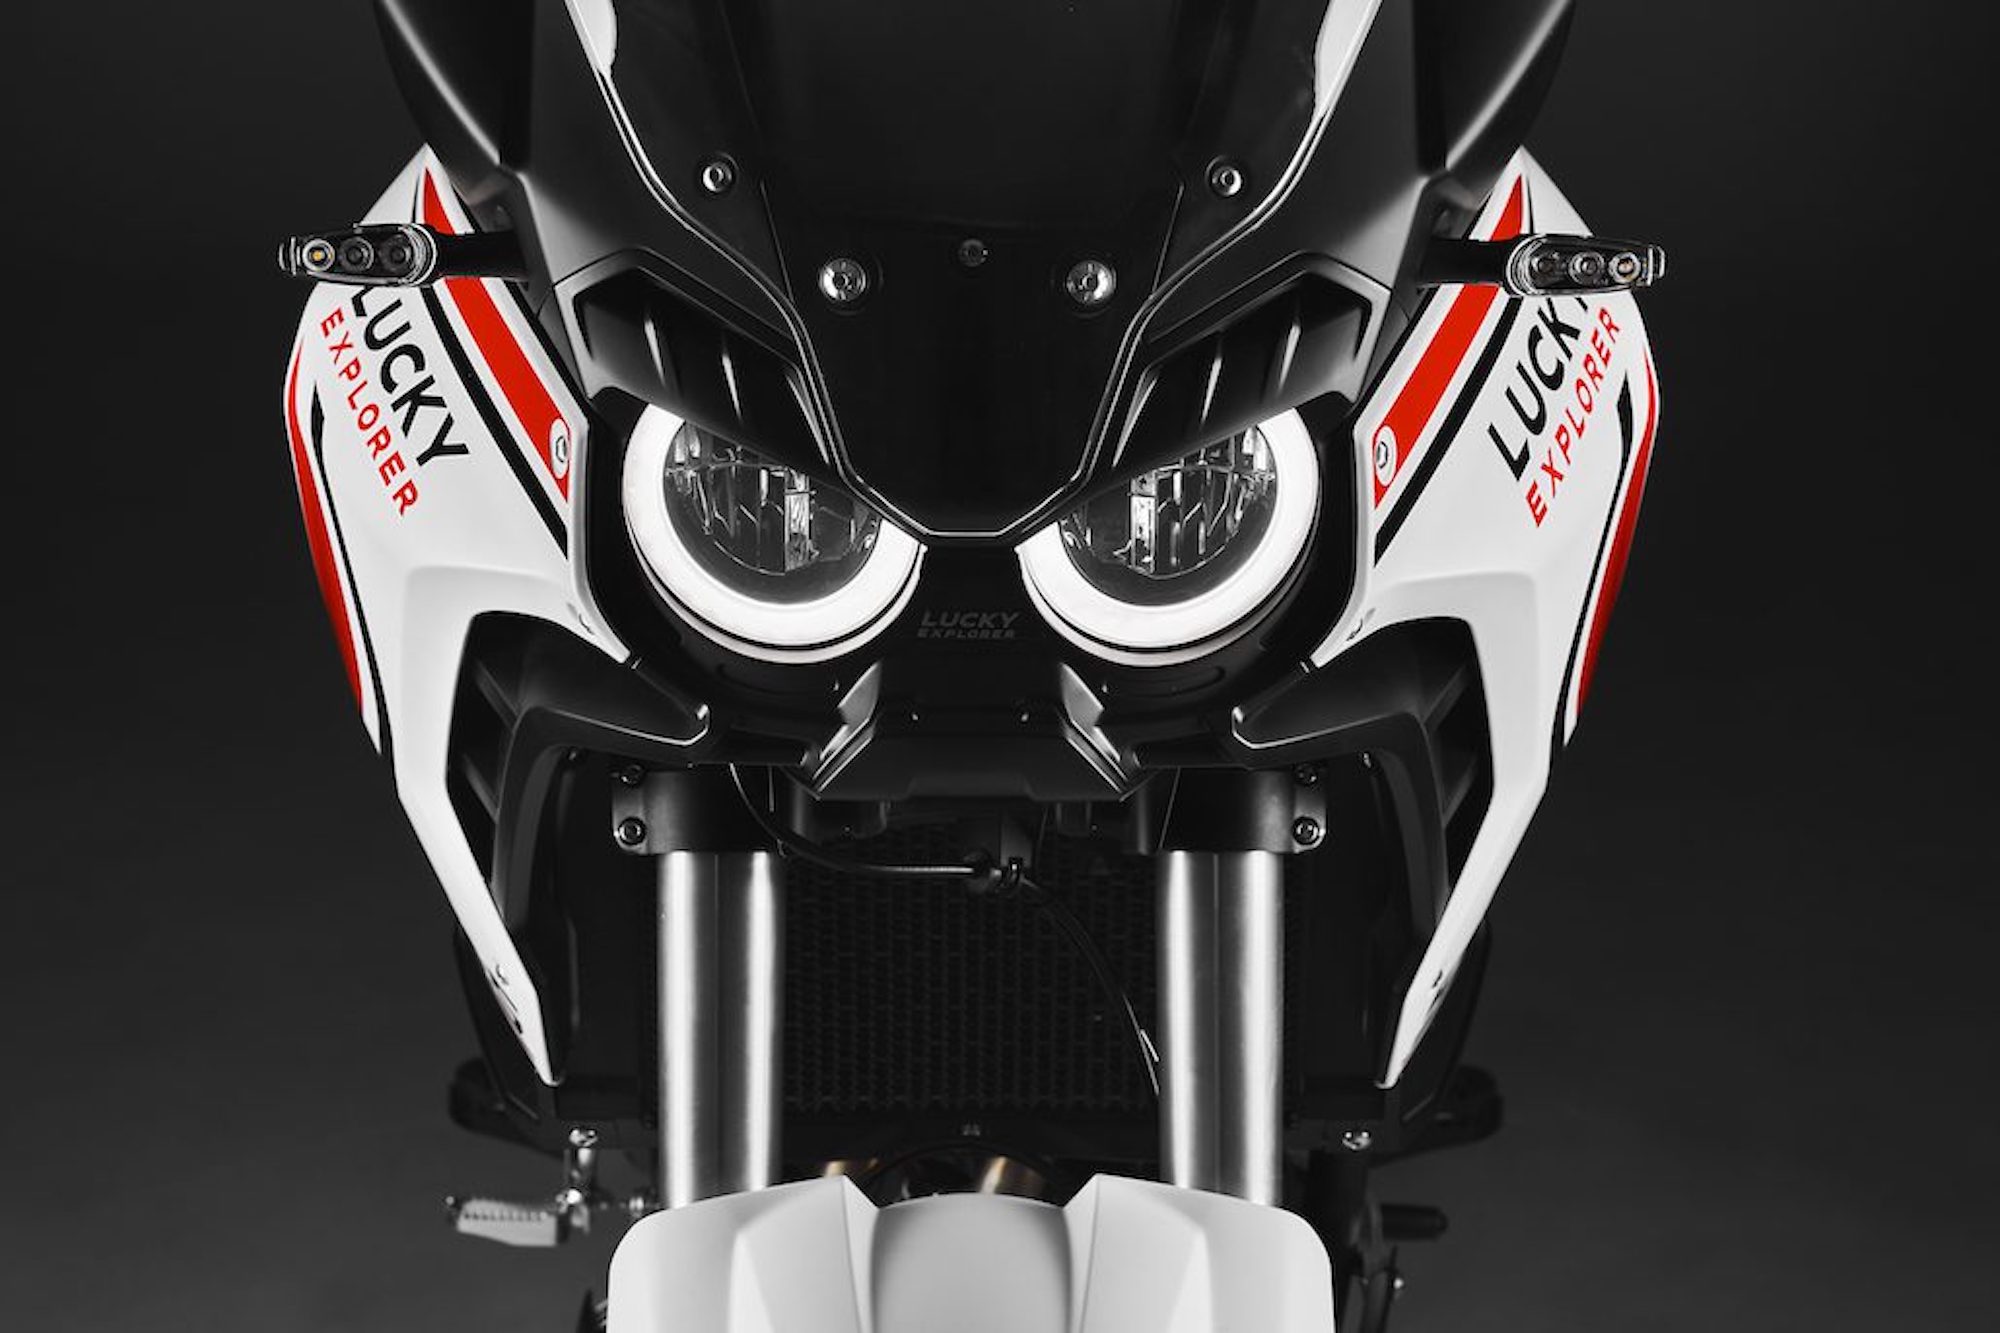 A view of MV Agusta's Lucky Explorer 9.5, which has been rebranded to Enduro Veloce. Media sourced from Gear Junkie.